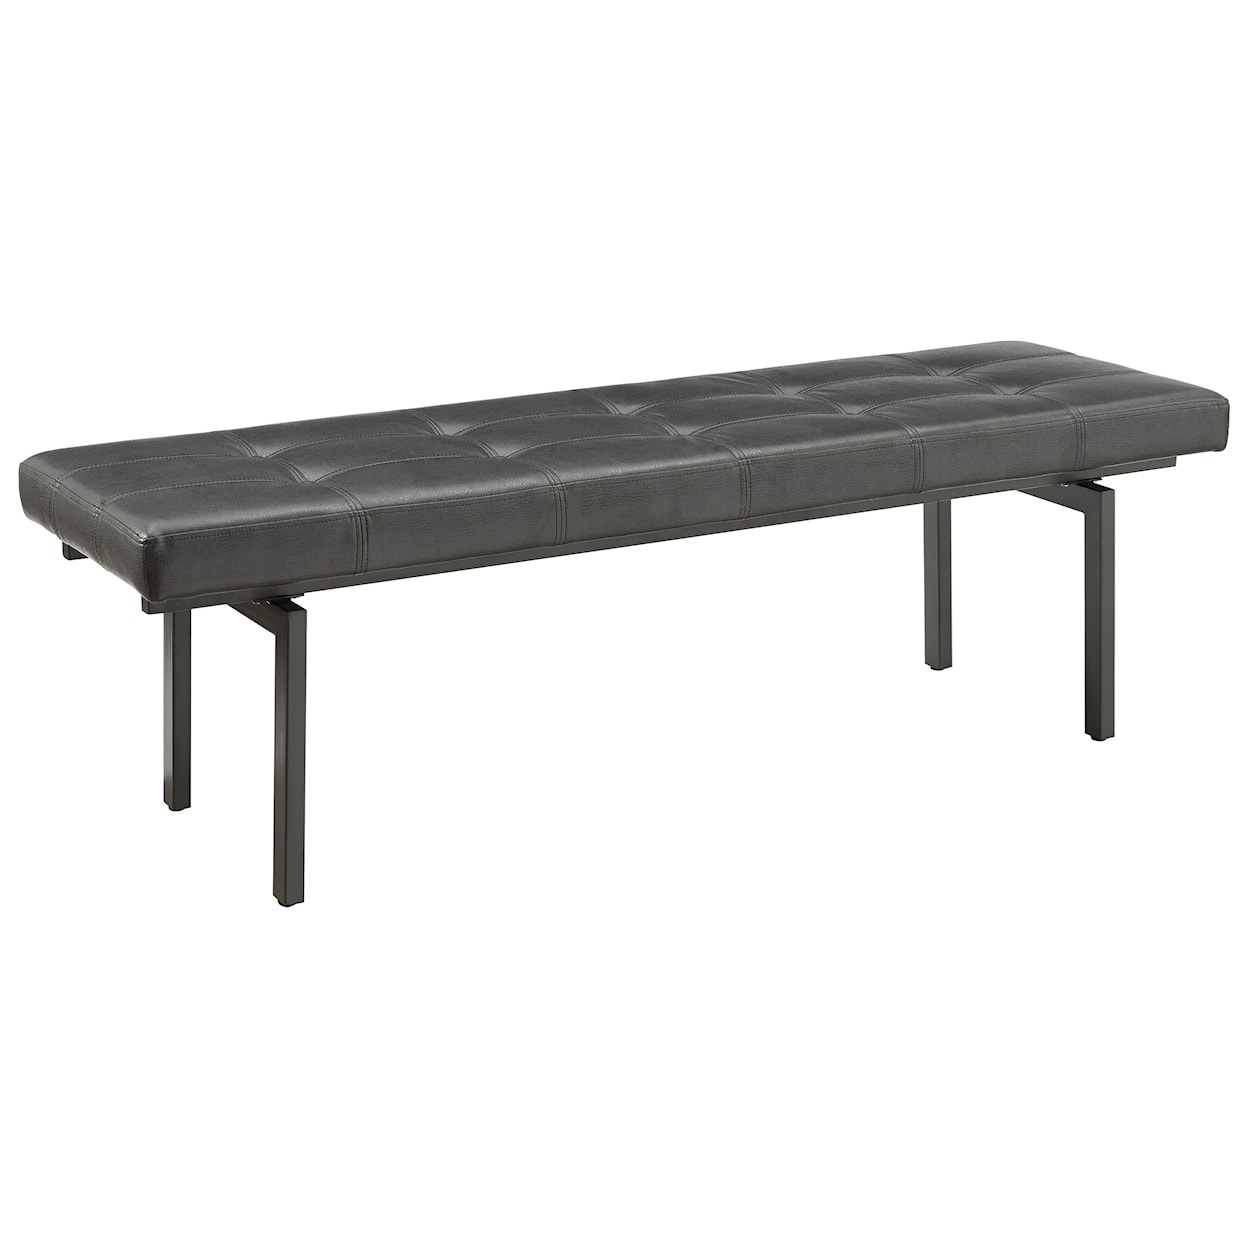 Accentrics Home TruModern Bed Bench - Powdered Coated